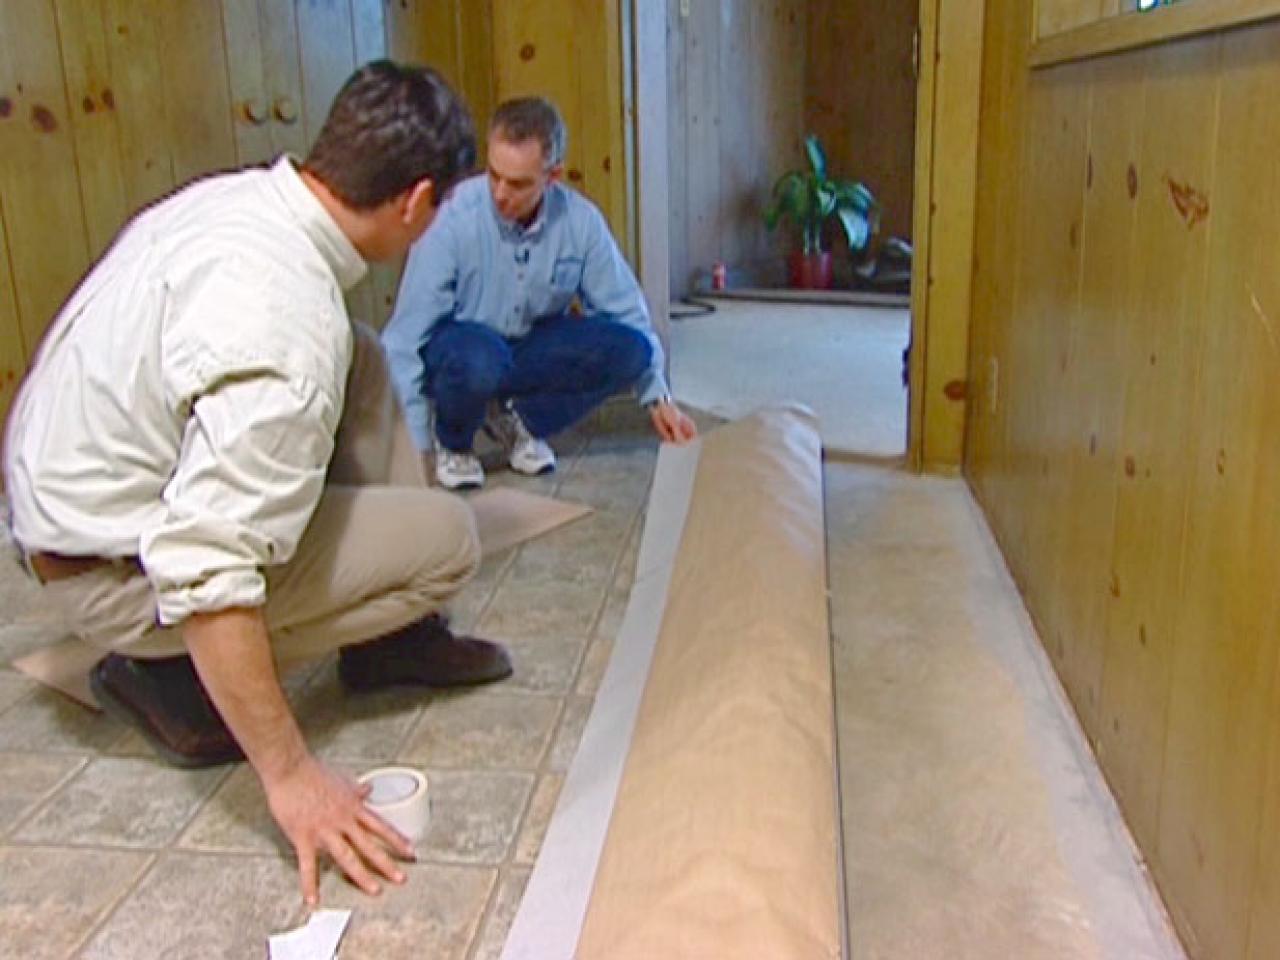 How To Install Vinyl Flooring Tos, Roll Out Vinyl Flooring That Looks Like Wood